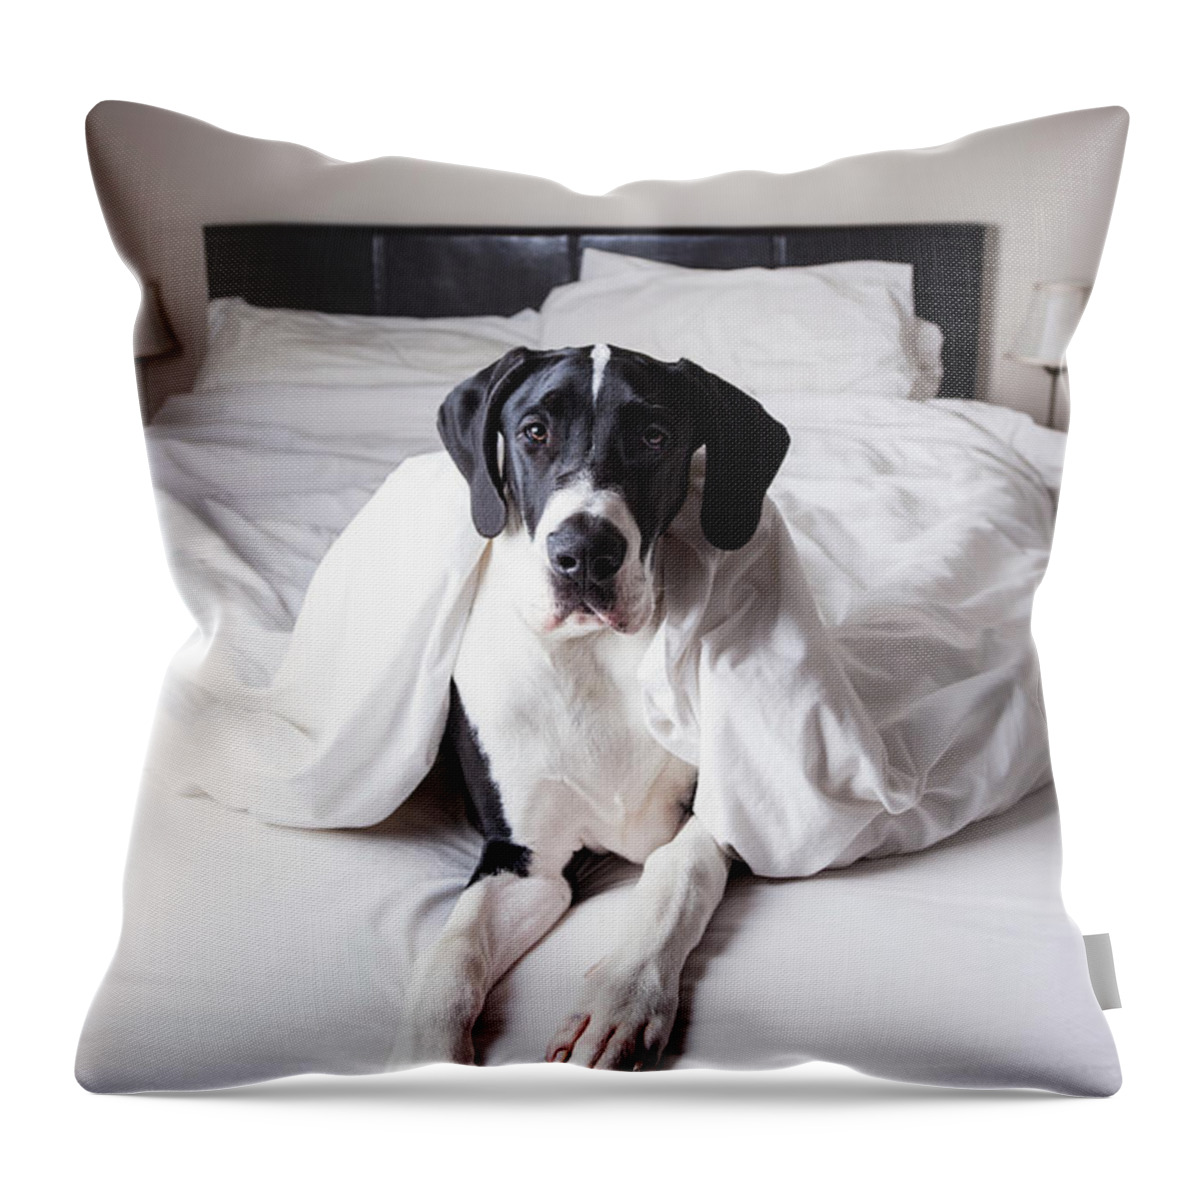 Pets Throw Pillow featuring the photograph Great Dane On A Bed by Claire Plumridge